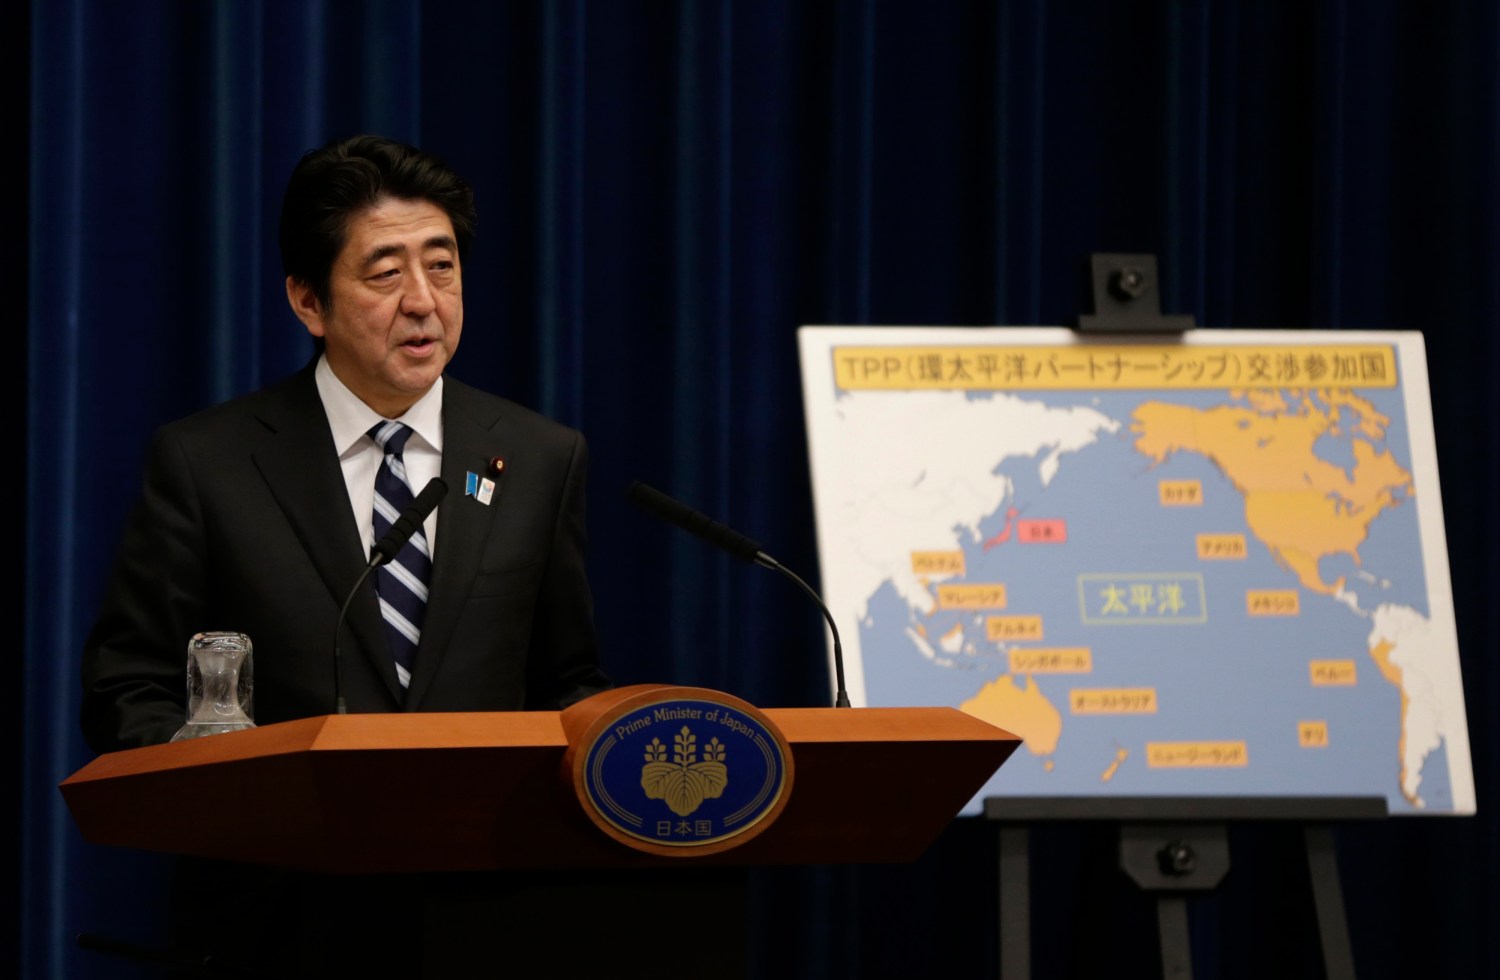 Japan's Prime Minister Shinzo Abe speaks next to a map showing participating countries in rule-making negotiations for the Trans-Pacific Partnership (TPP) during a news conference at his official residence in Tokyo March 15, 2013. Abe announced on Friday that Tokyo will seek to join talks on a U.S.-led Pacific free trade pact which proponents say will tap vibrant regional growth, open Japan to tough competition and boost momentum for reforms needed to revive the long-stagnant economy. REUTERS/Toru Hanai